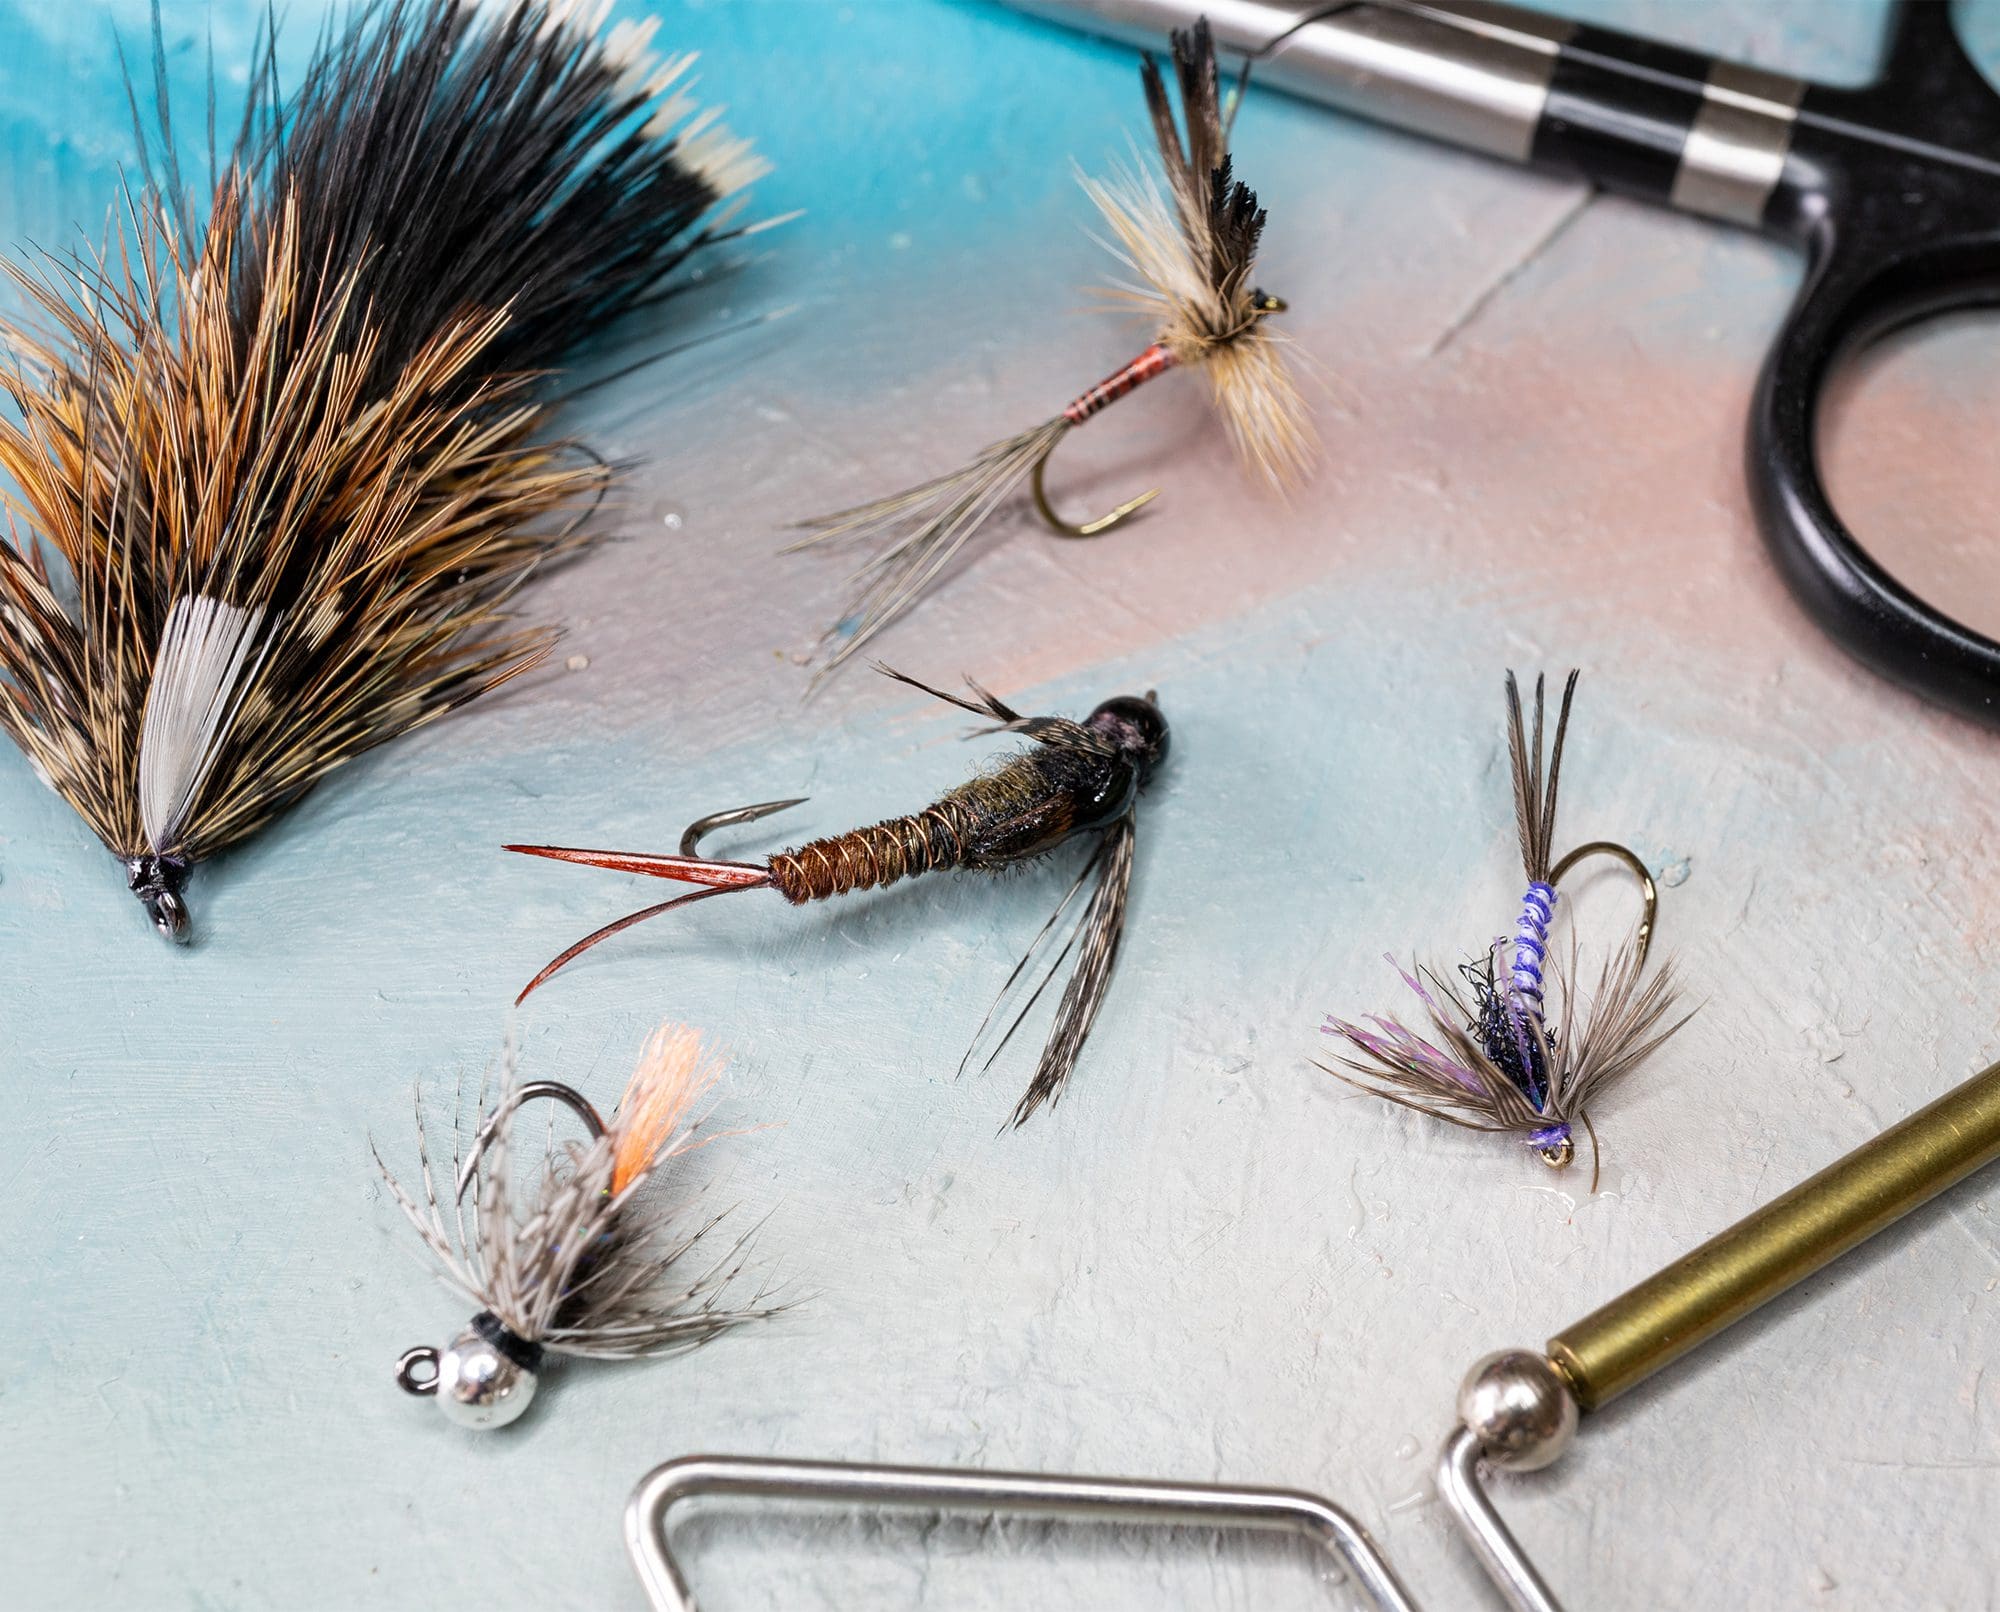 Using Upland Bird Feathers for Fly Tying Patterns - Project Upland